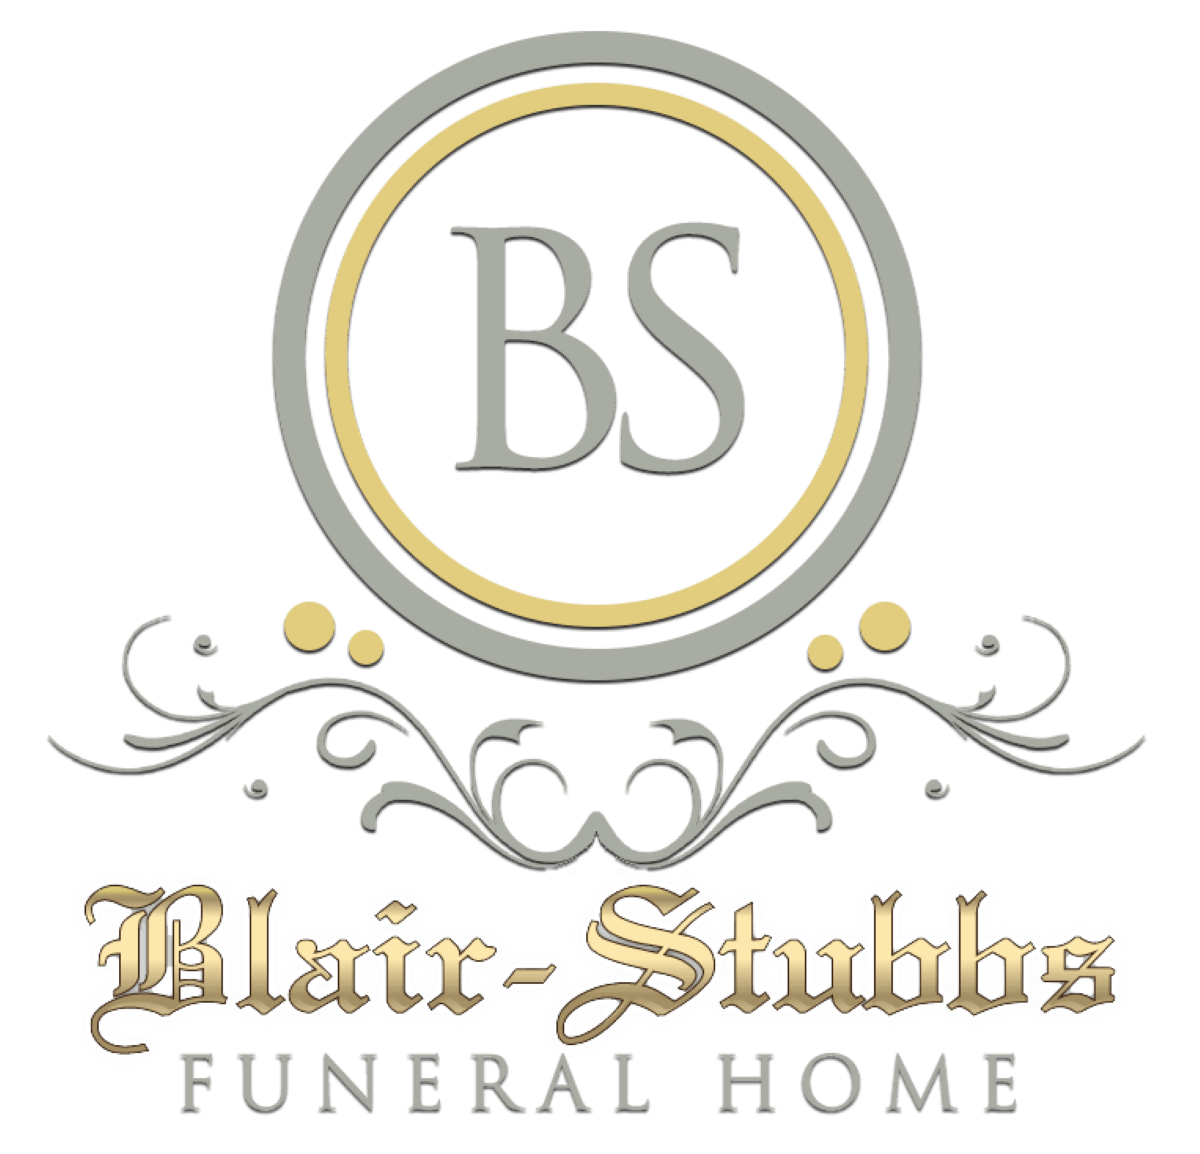 Blair Stubbs Funeral Home | Mexia TX funeral home and cremation